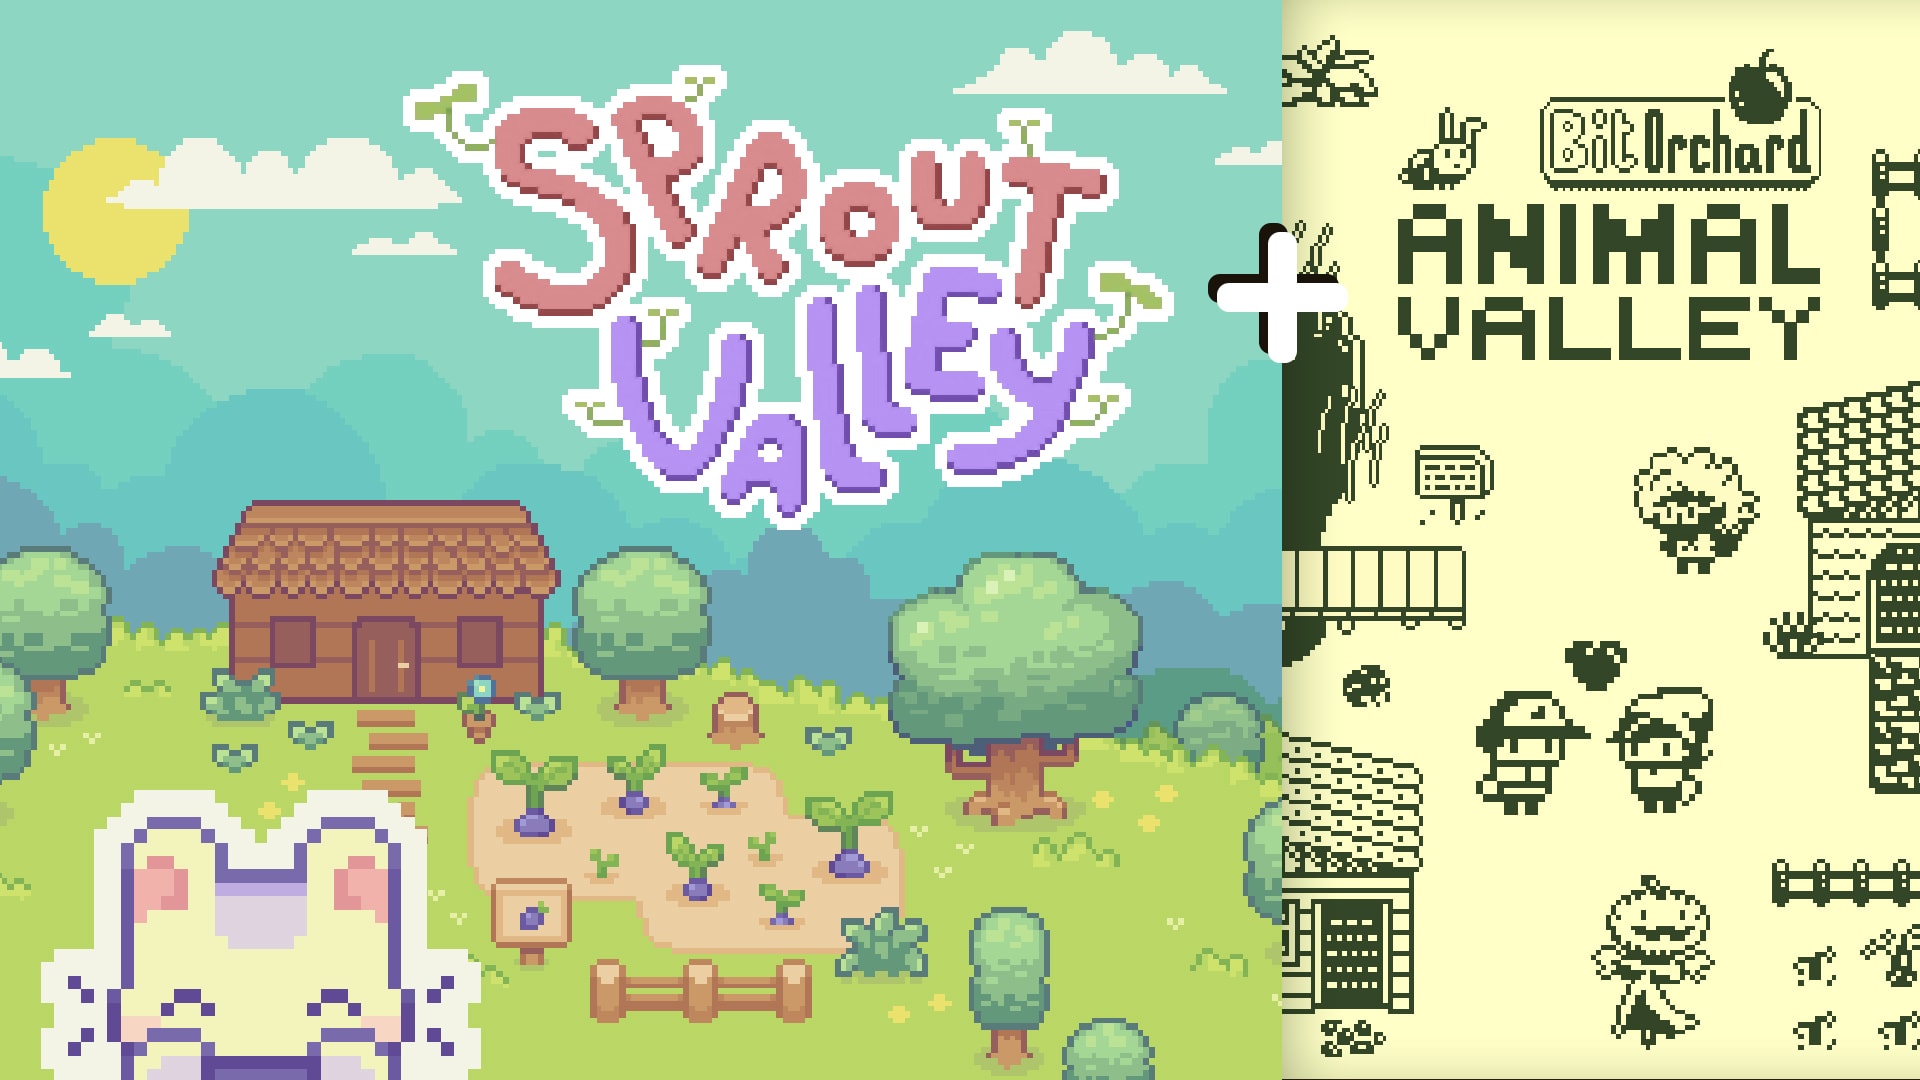 Sprout Valley + Bit Orchard: Animal Valley